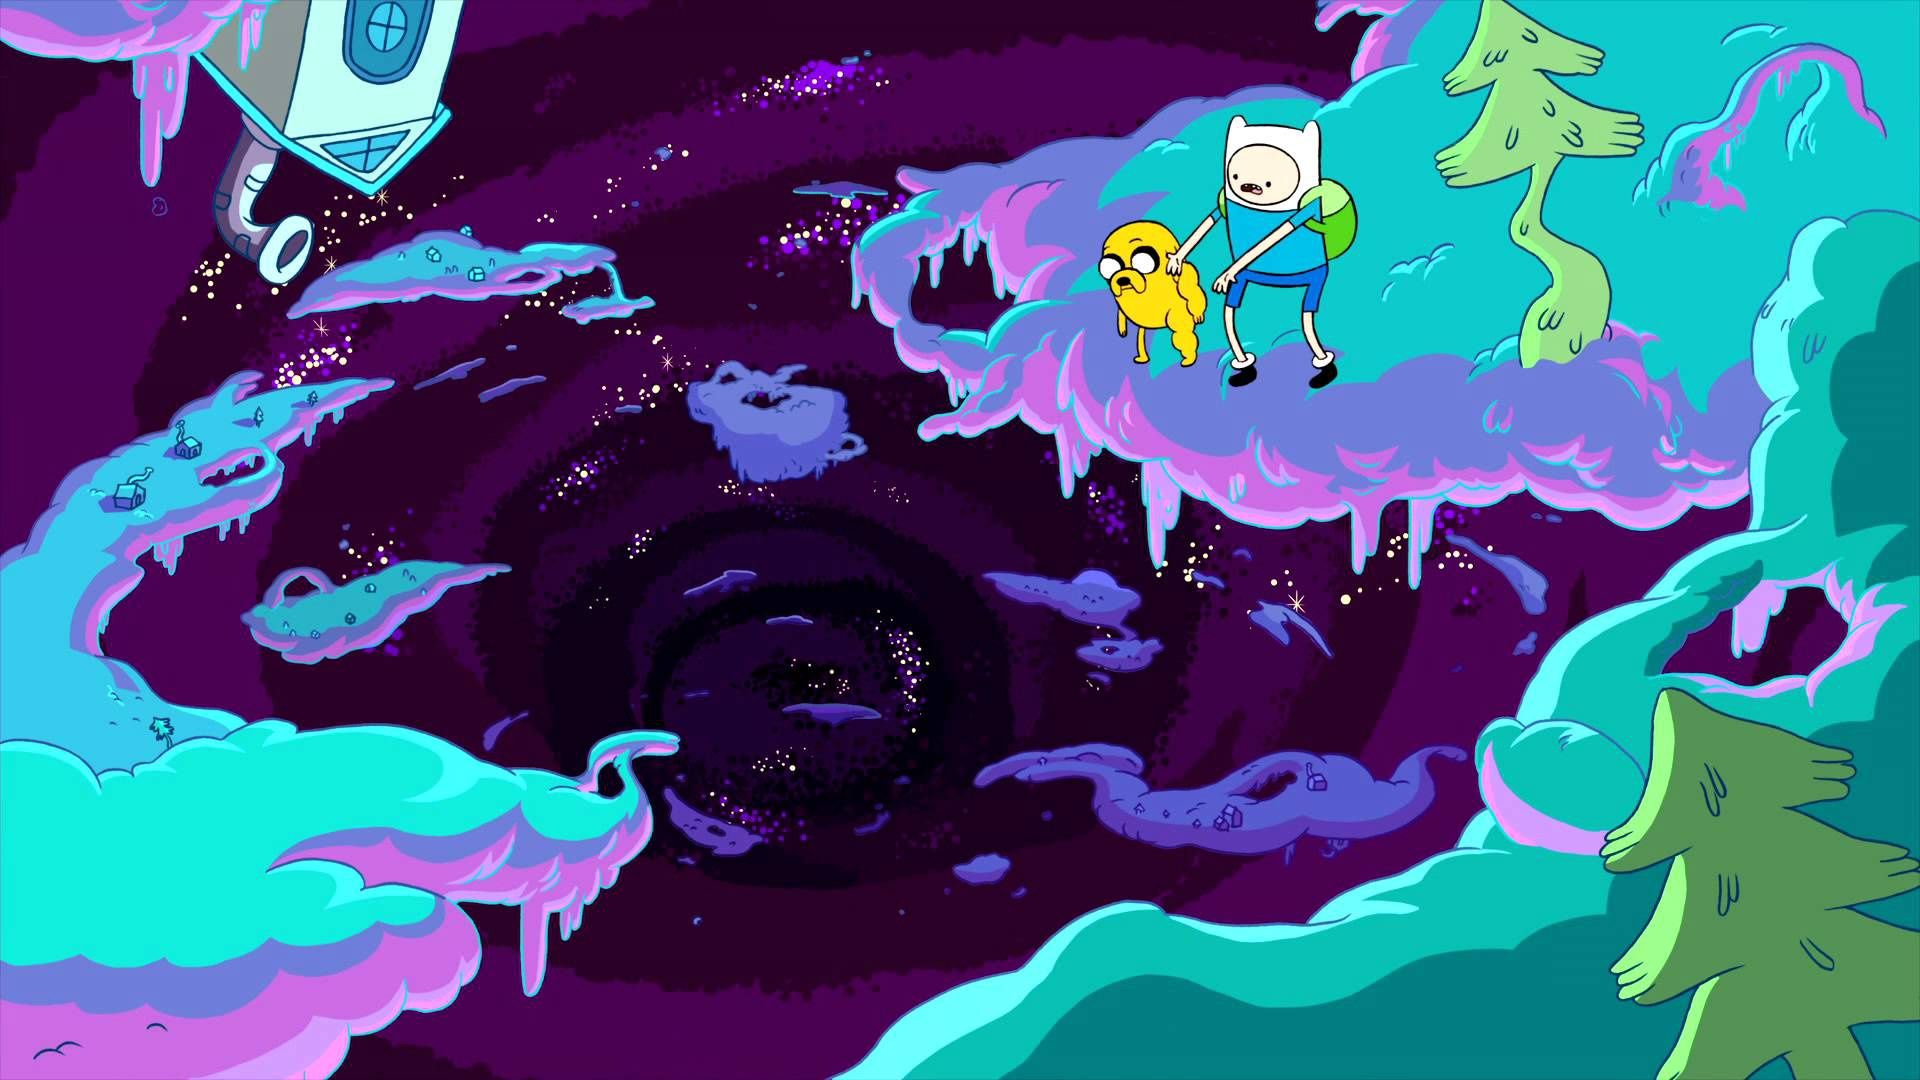 Adventure Time Finn and Jake in the sky wallpaper 1920x1080 - Adventure Time